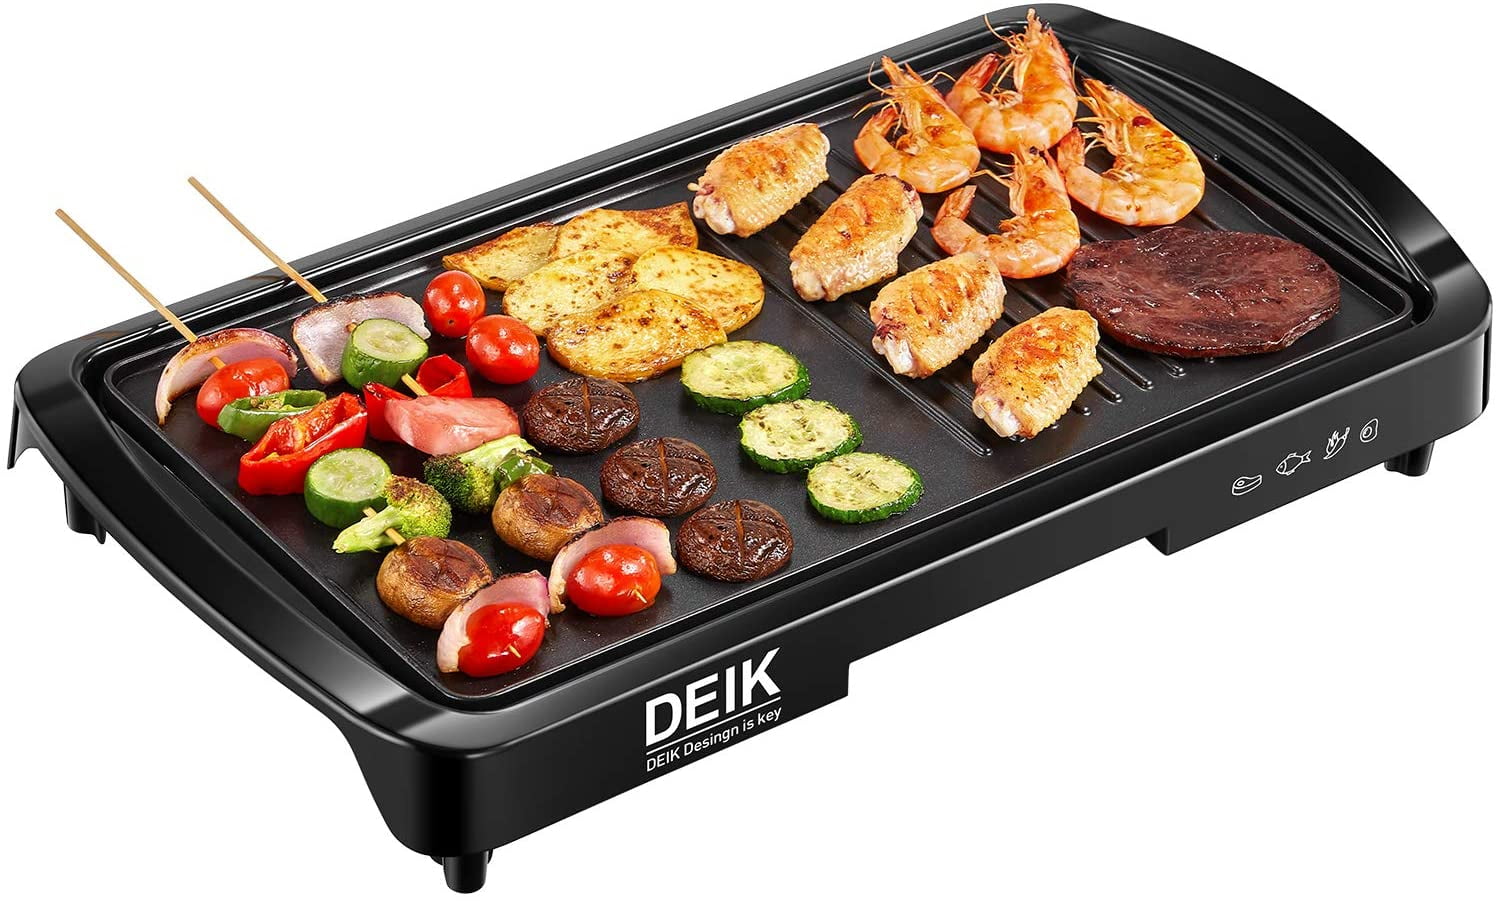 Electric Smokeless Indoor Grill with Non-Stick Tabletop Electric Griddle, 19 inch Teppanyaki Grills for BBQ Party Camping Cooking, Black